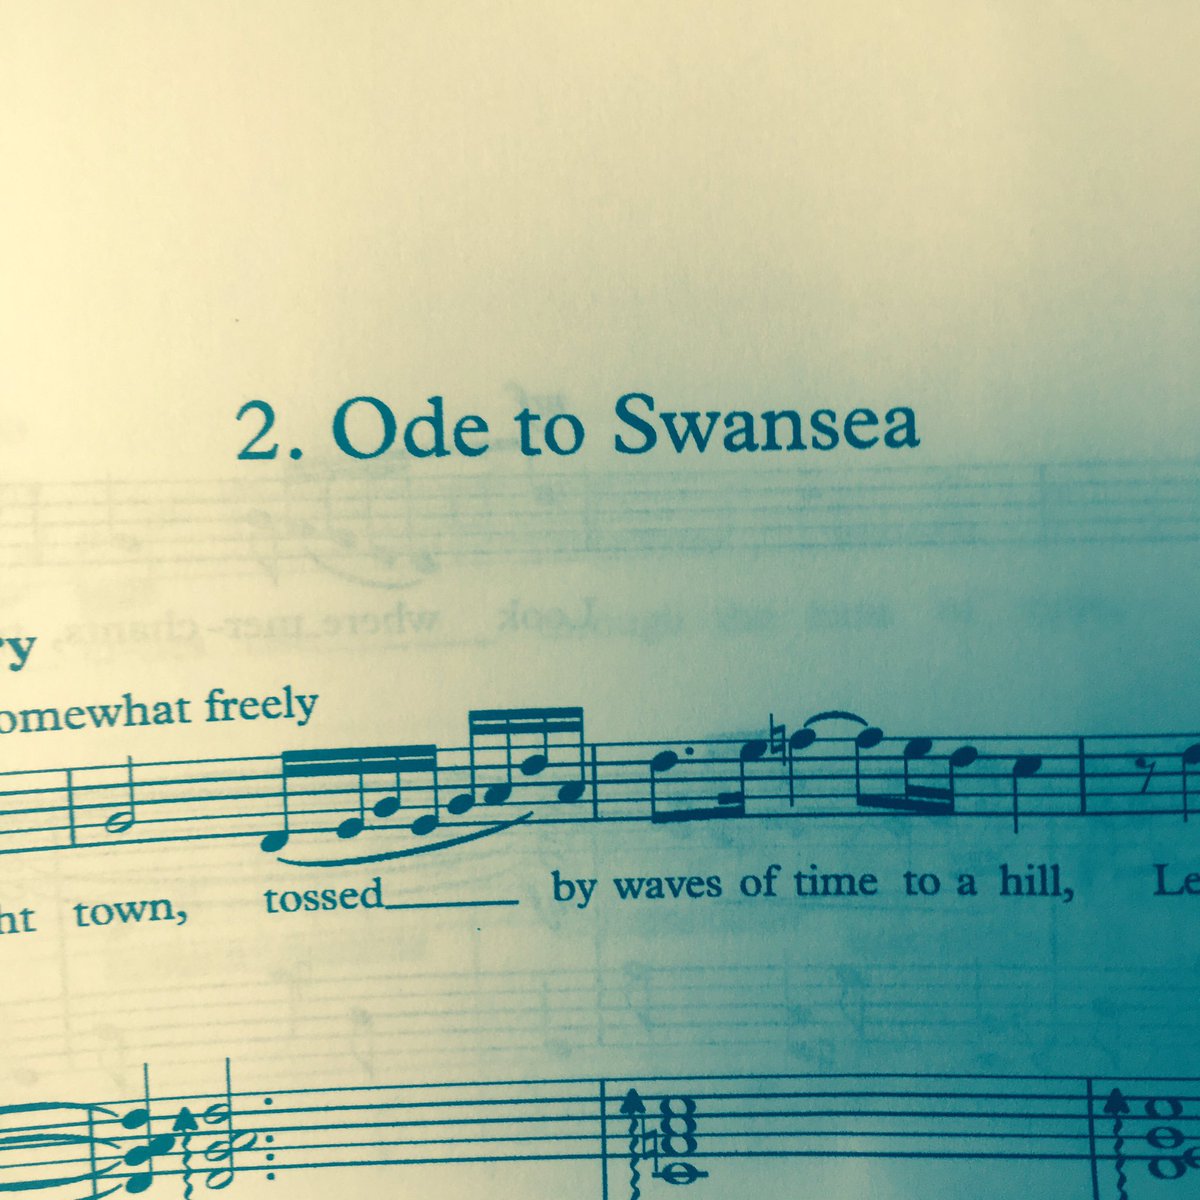 VERY excited to be learning a new song cycle by @Jefforg for @SwanseaFestMA. Poems by #VernonWatkins #NigelJenkins #GillianClarke. #Swansea